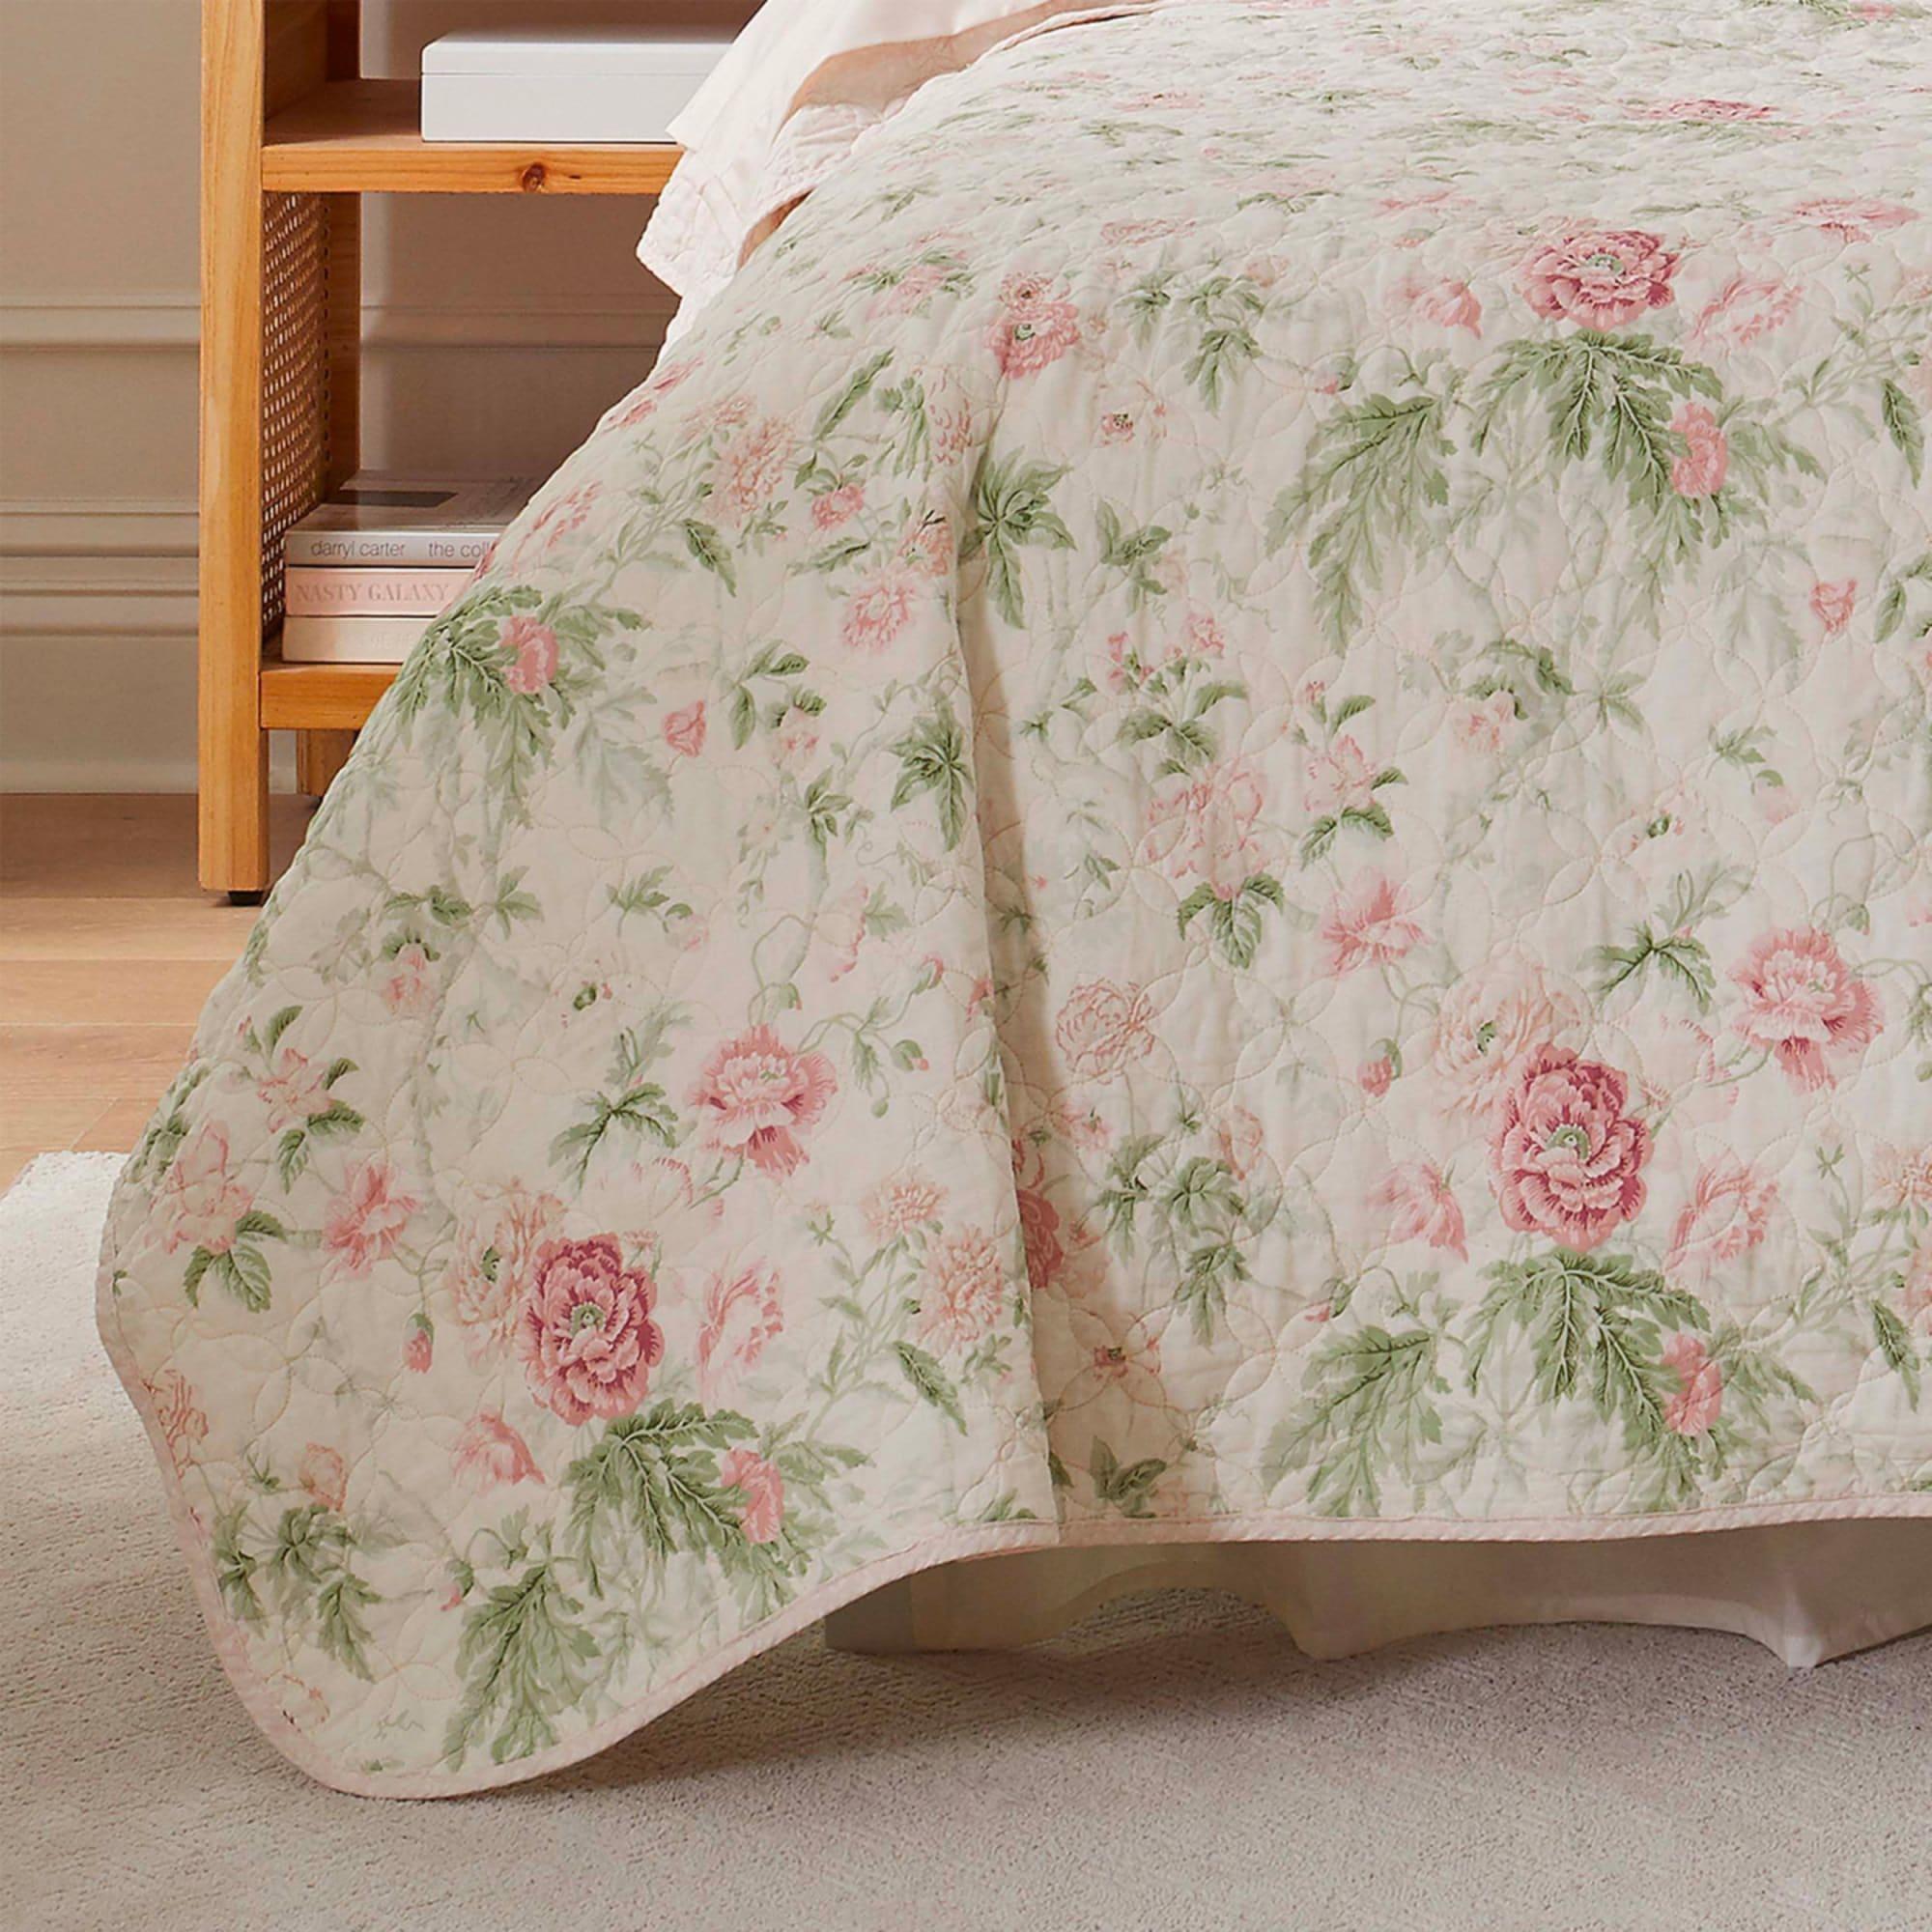 Laura Ashley Breezy Floral Printed Coverlet Set Queen Image 4